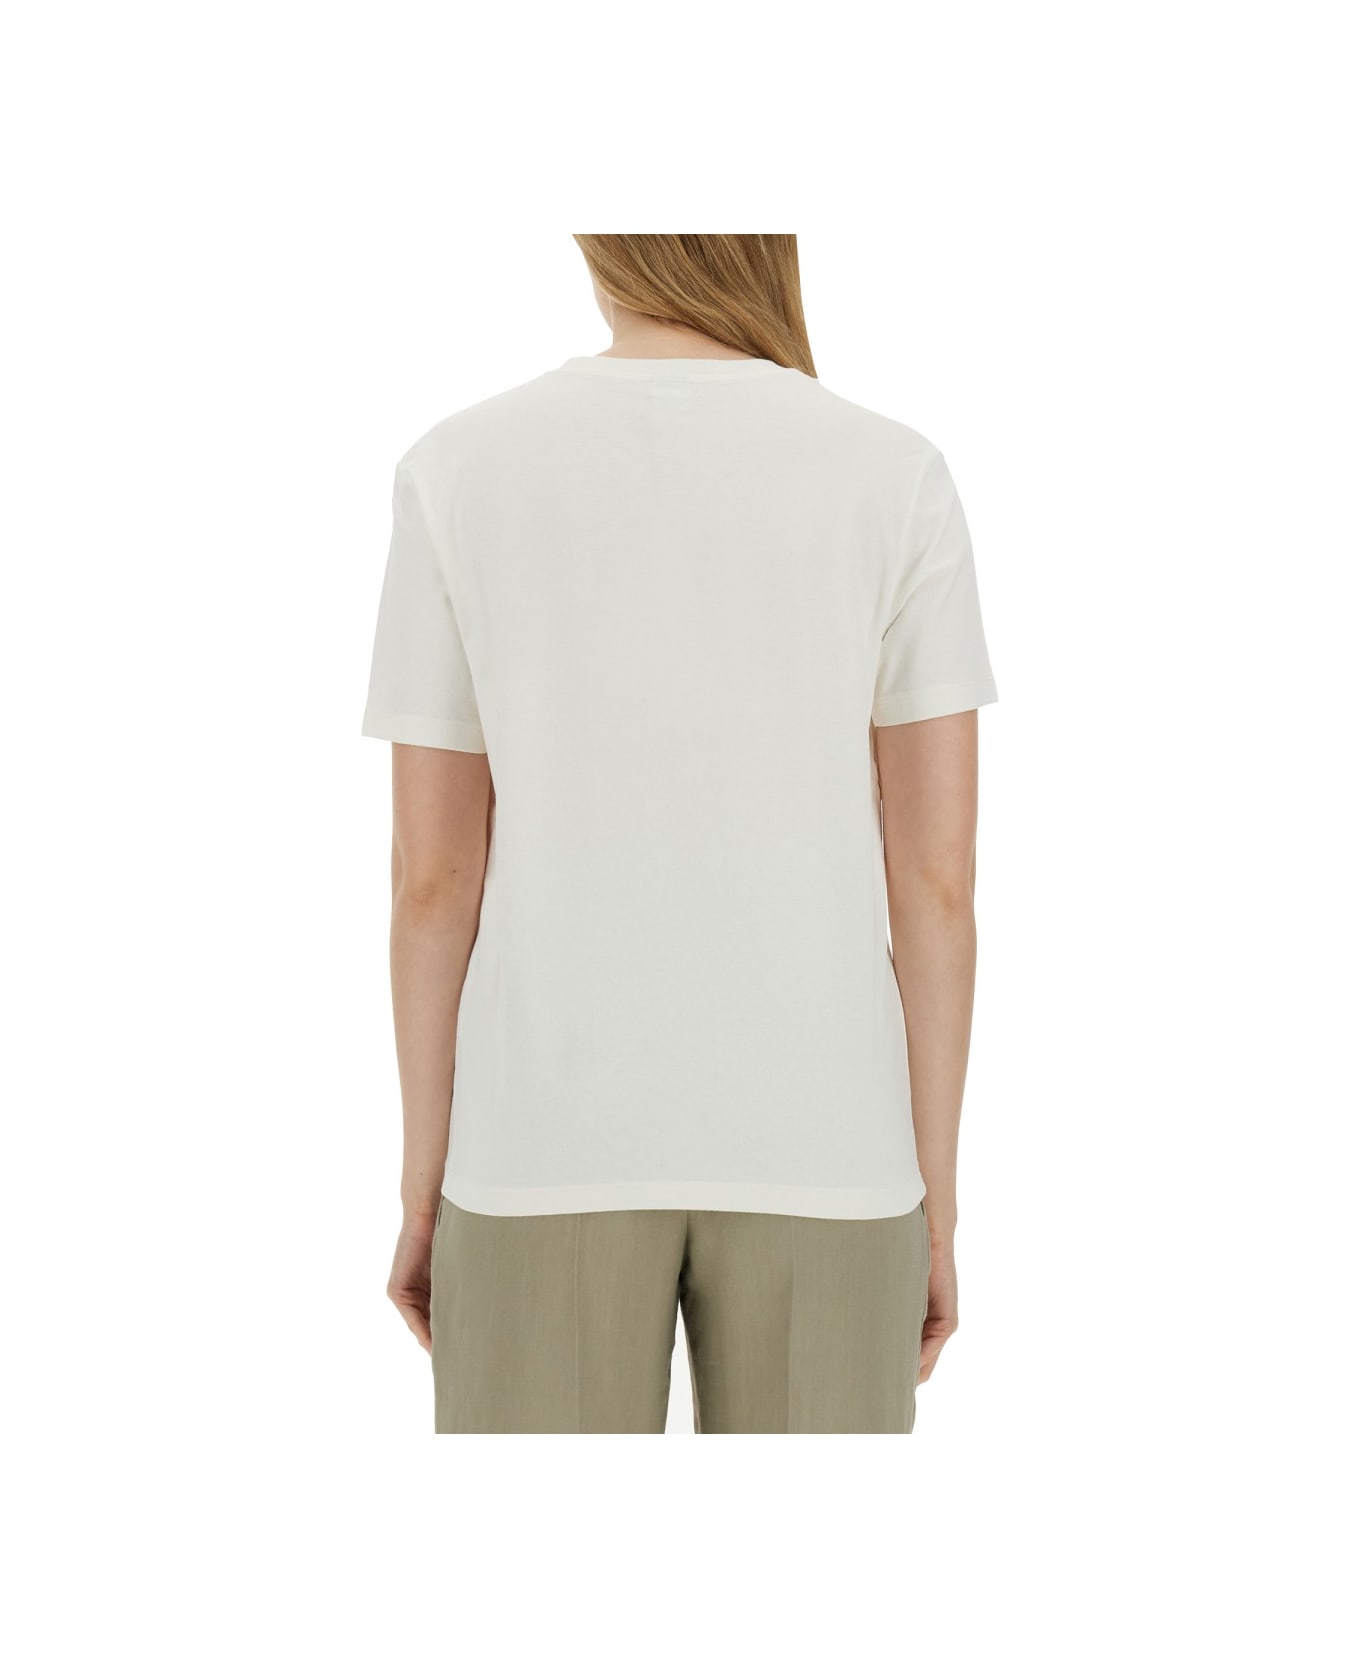 PS by Paul Smith T-shirt "floral" - WHITE